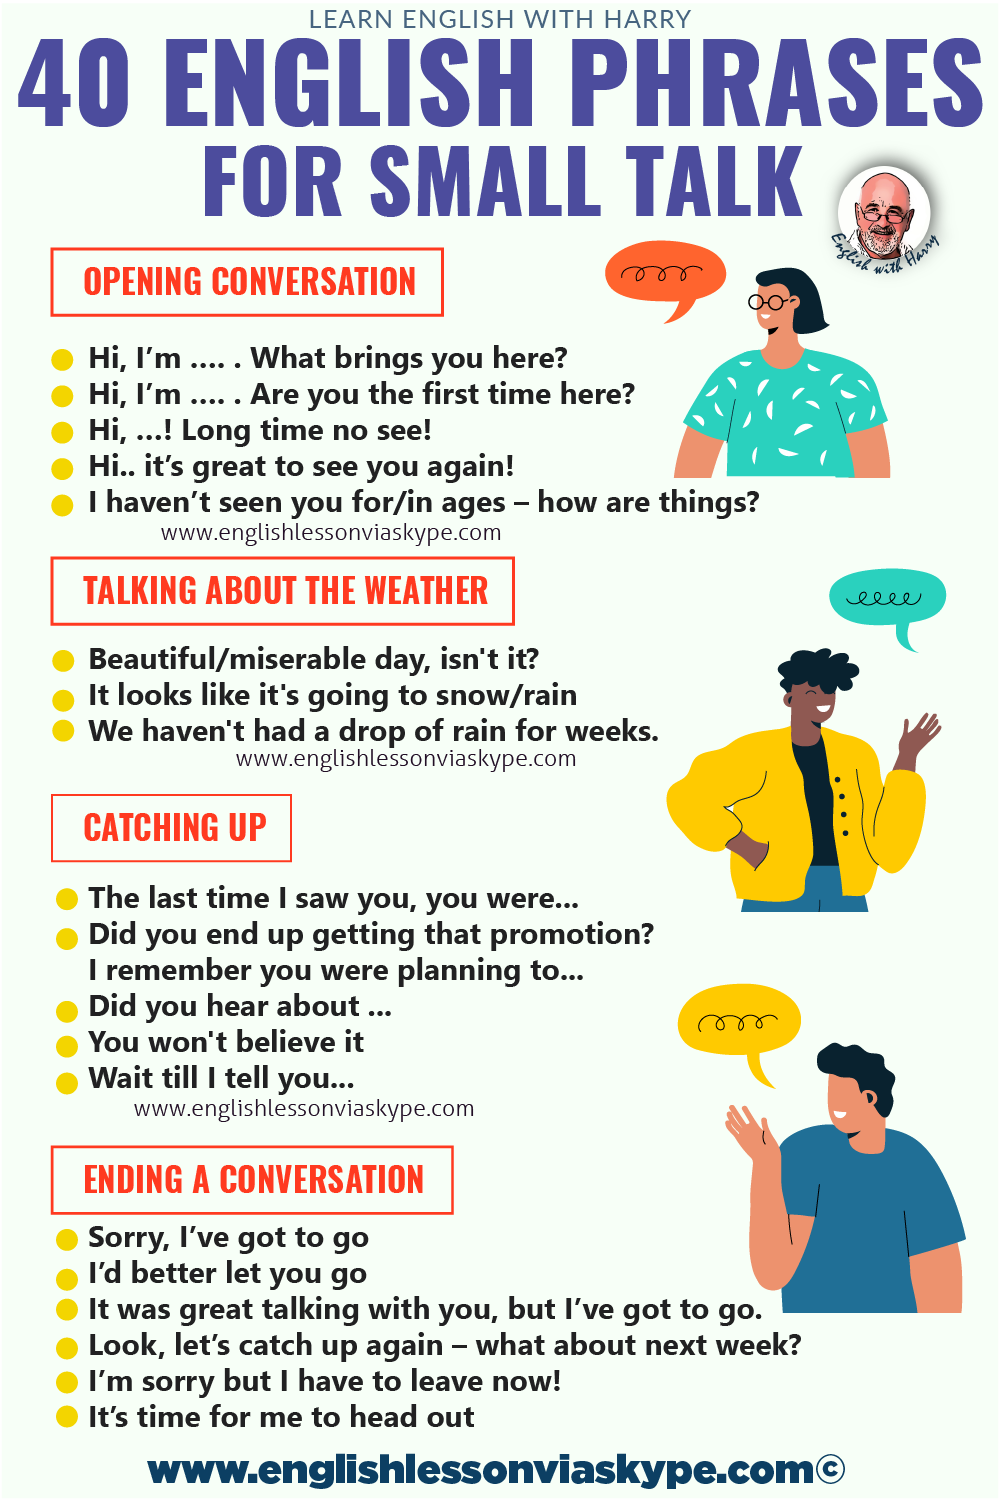 ENGLISH FLUENCY SECRETS 🤫  💬 GREAT phrases for Small Talk 